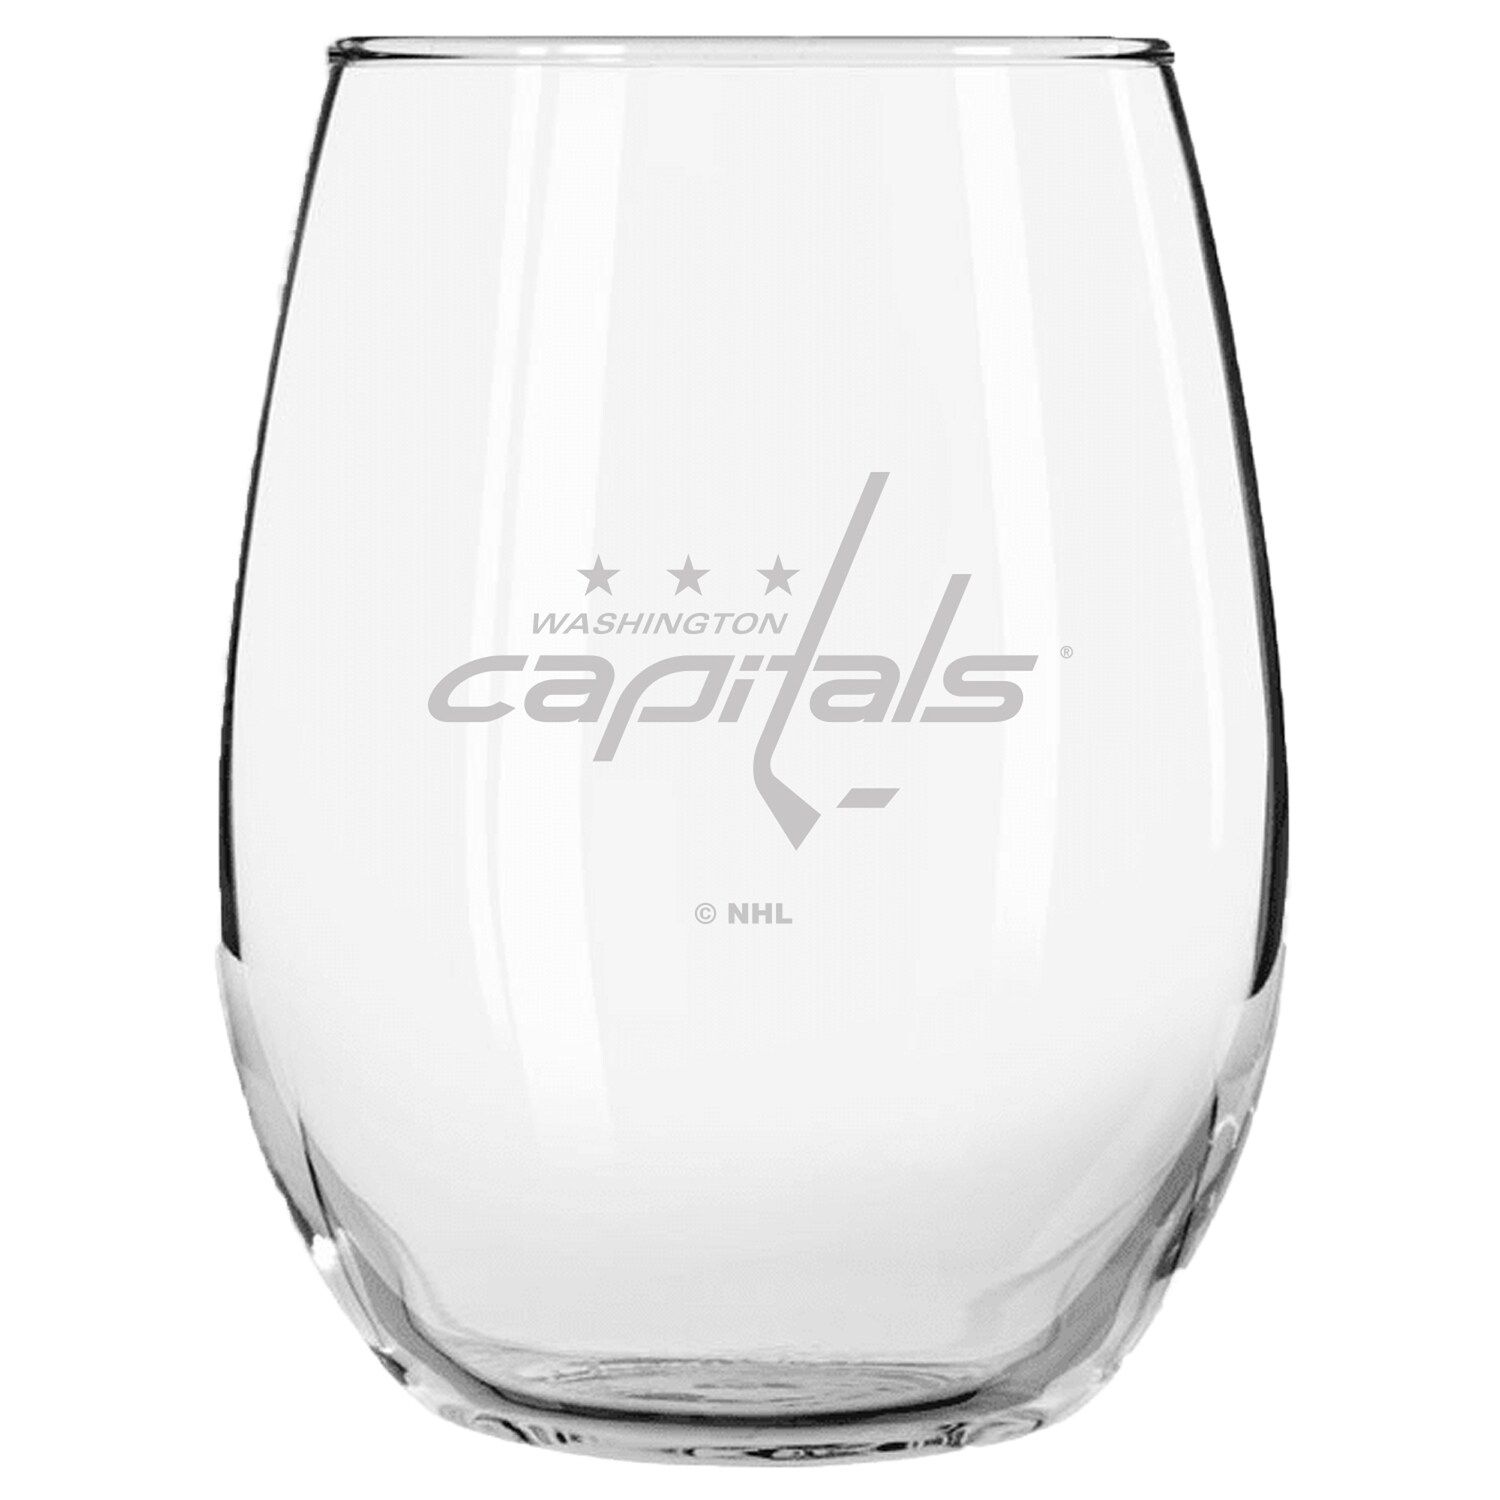 Image for Unbranded Washington Capitals 15oz. Etched Stemless Glass Tumbler at Kohl's.